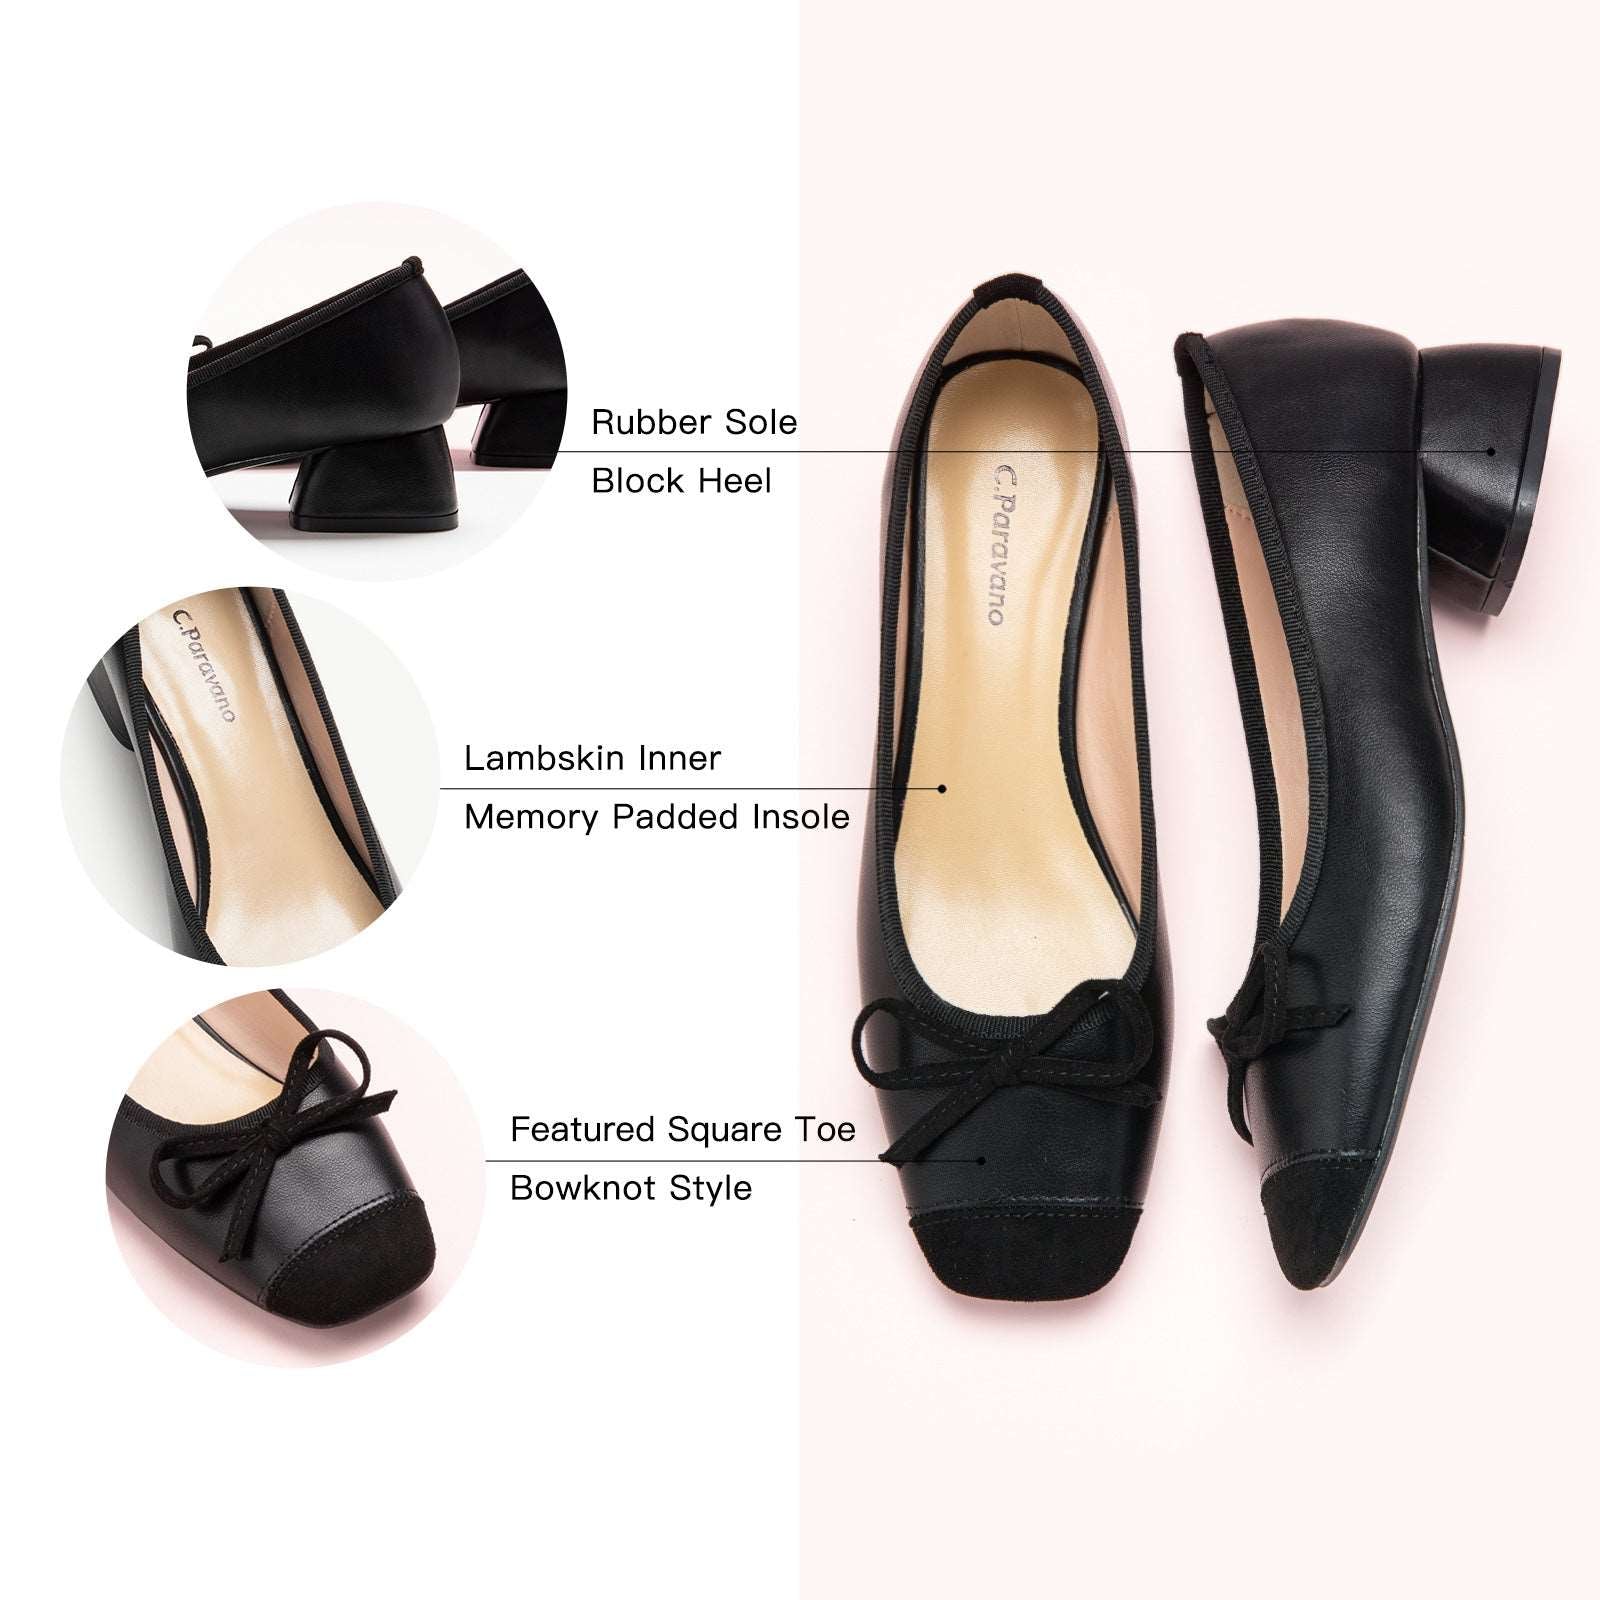 Embrace classic and versatile style with these black low heels, featuring a charming bowknot detail for a timeless look